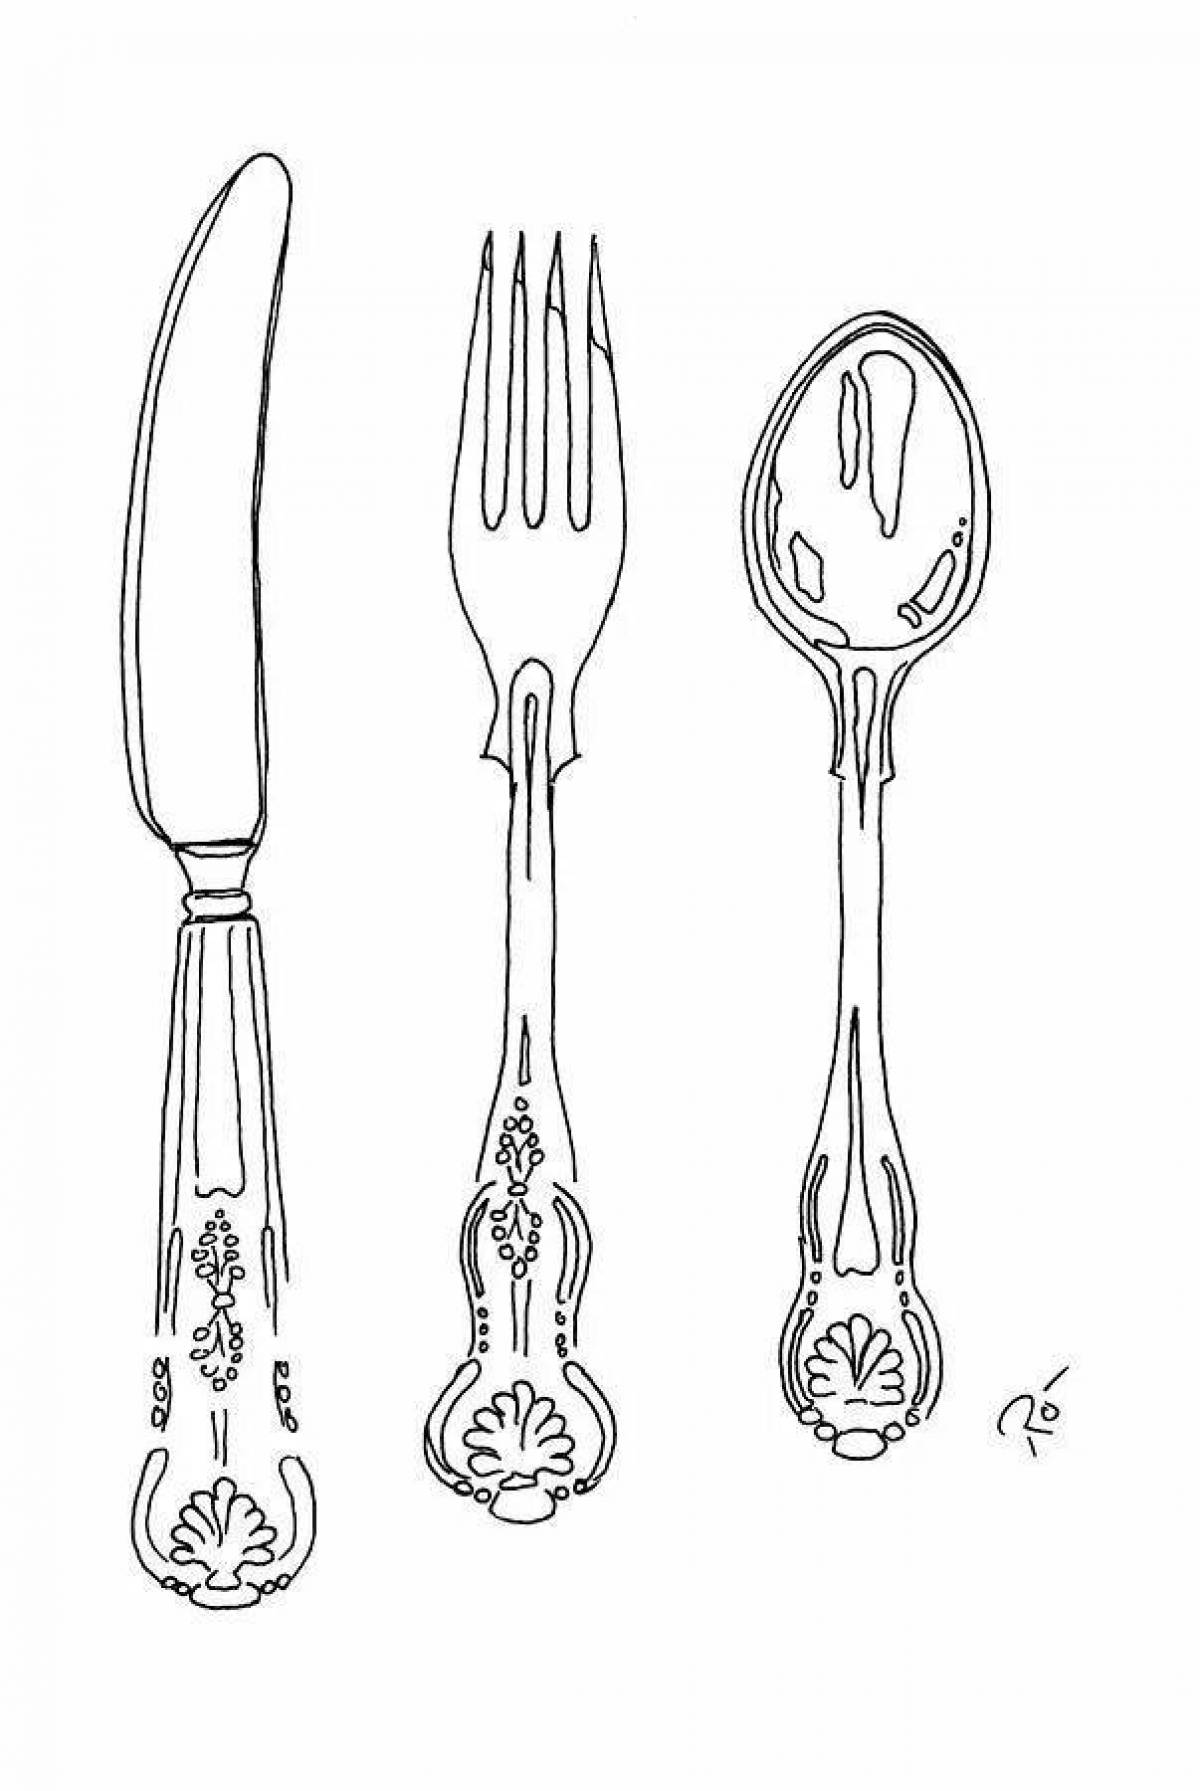 Charming cutlery coloring page